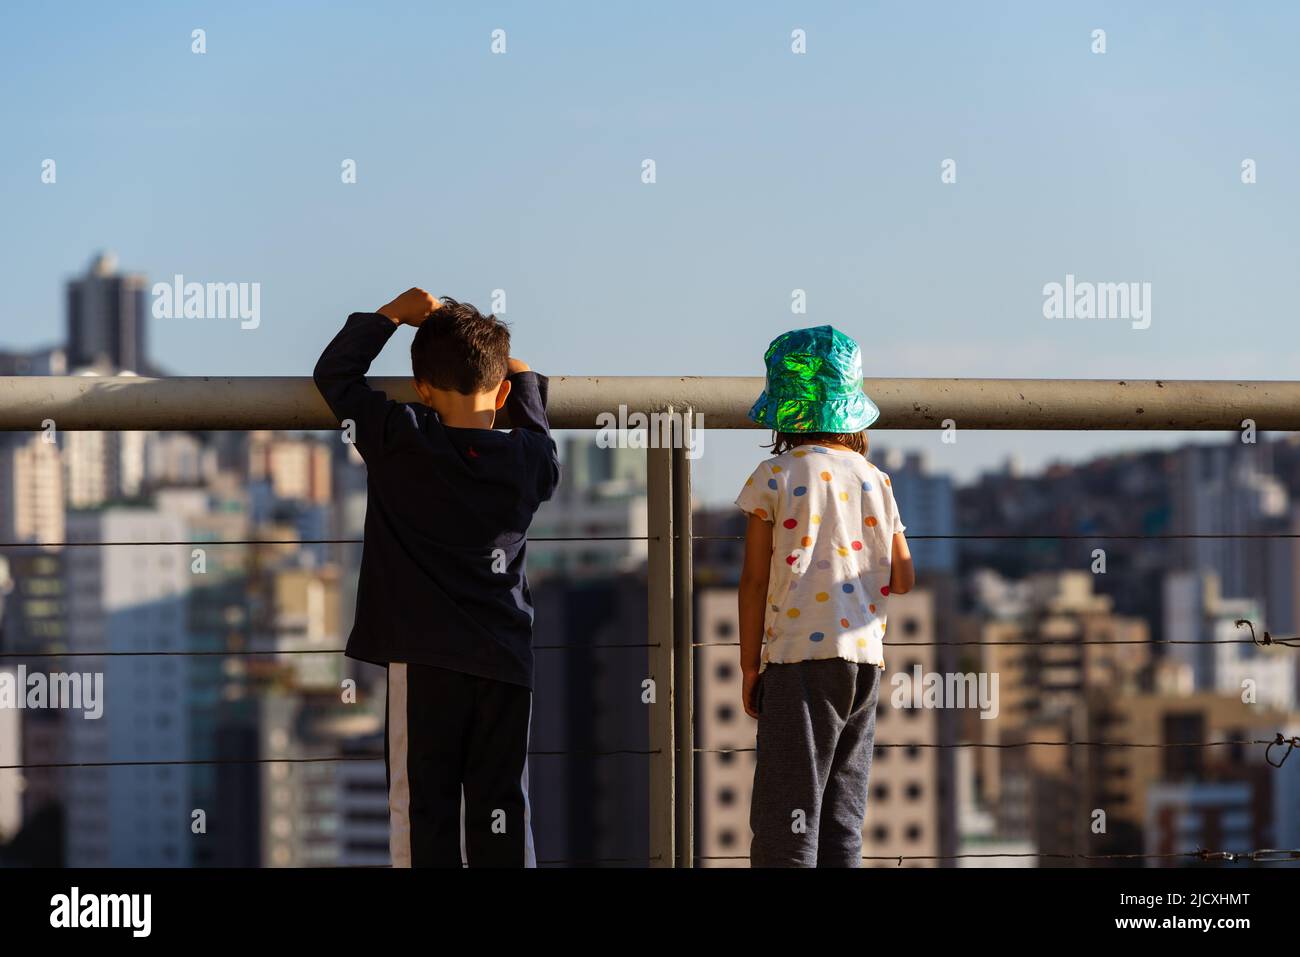 Rear view of a boy and a girl on the deck of Parque Amilcar Vianna Martins looking at the high rise buildings in Belo Horizonte, Minas Gerais, Brazil. Stock Photo